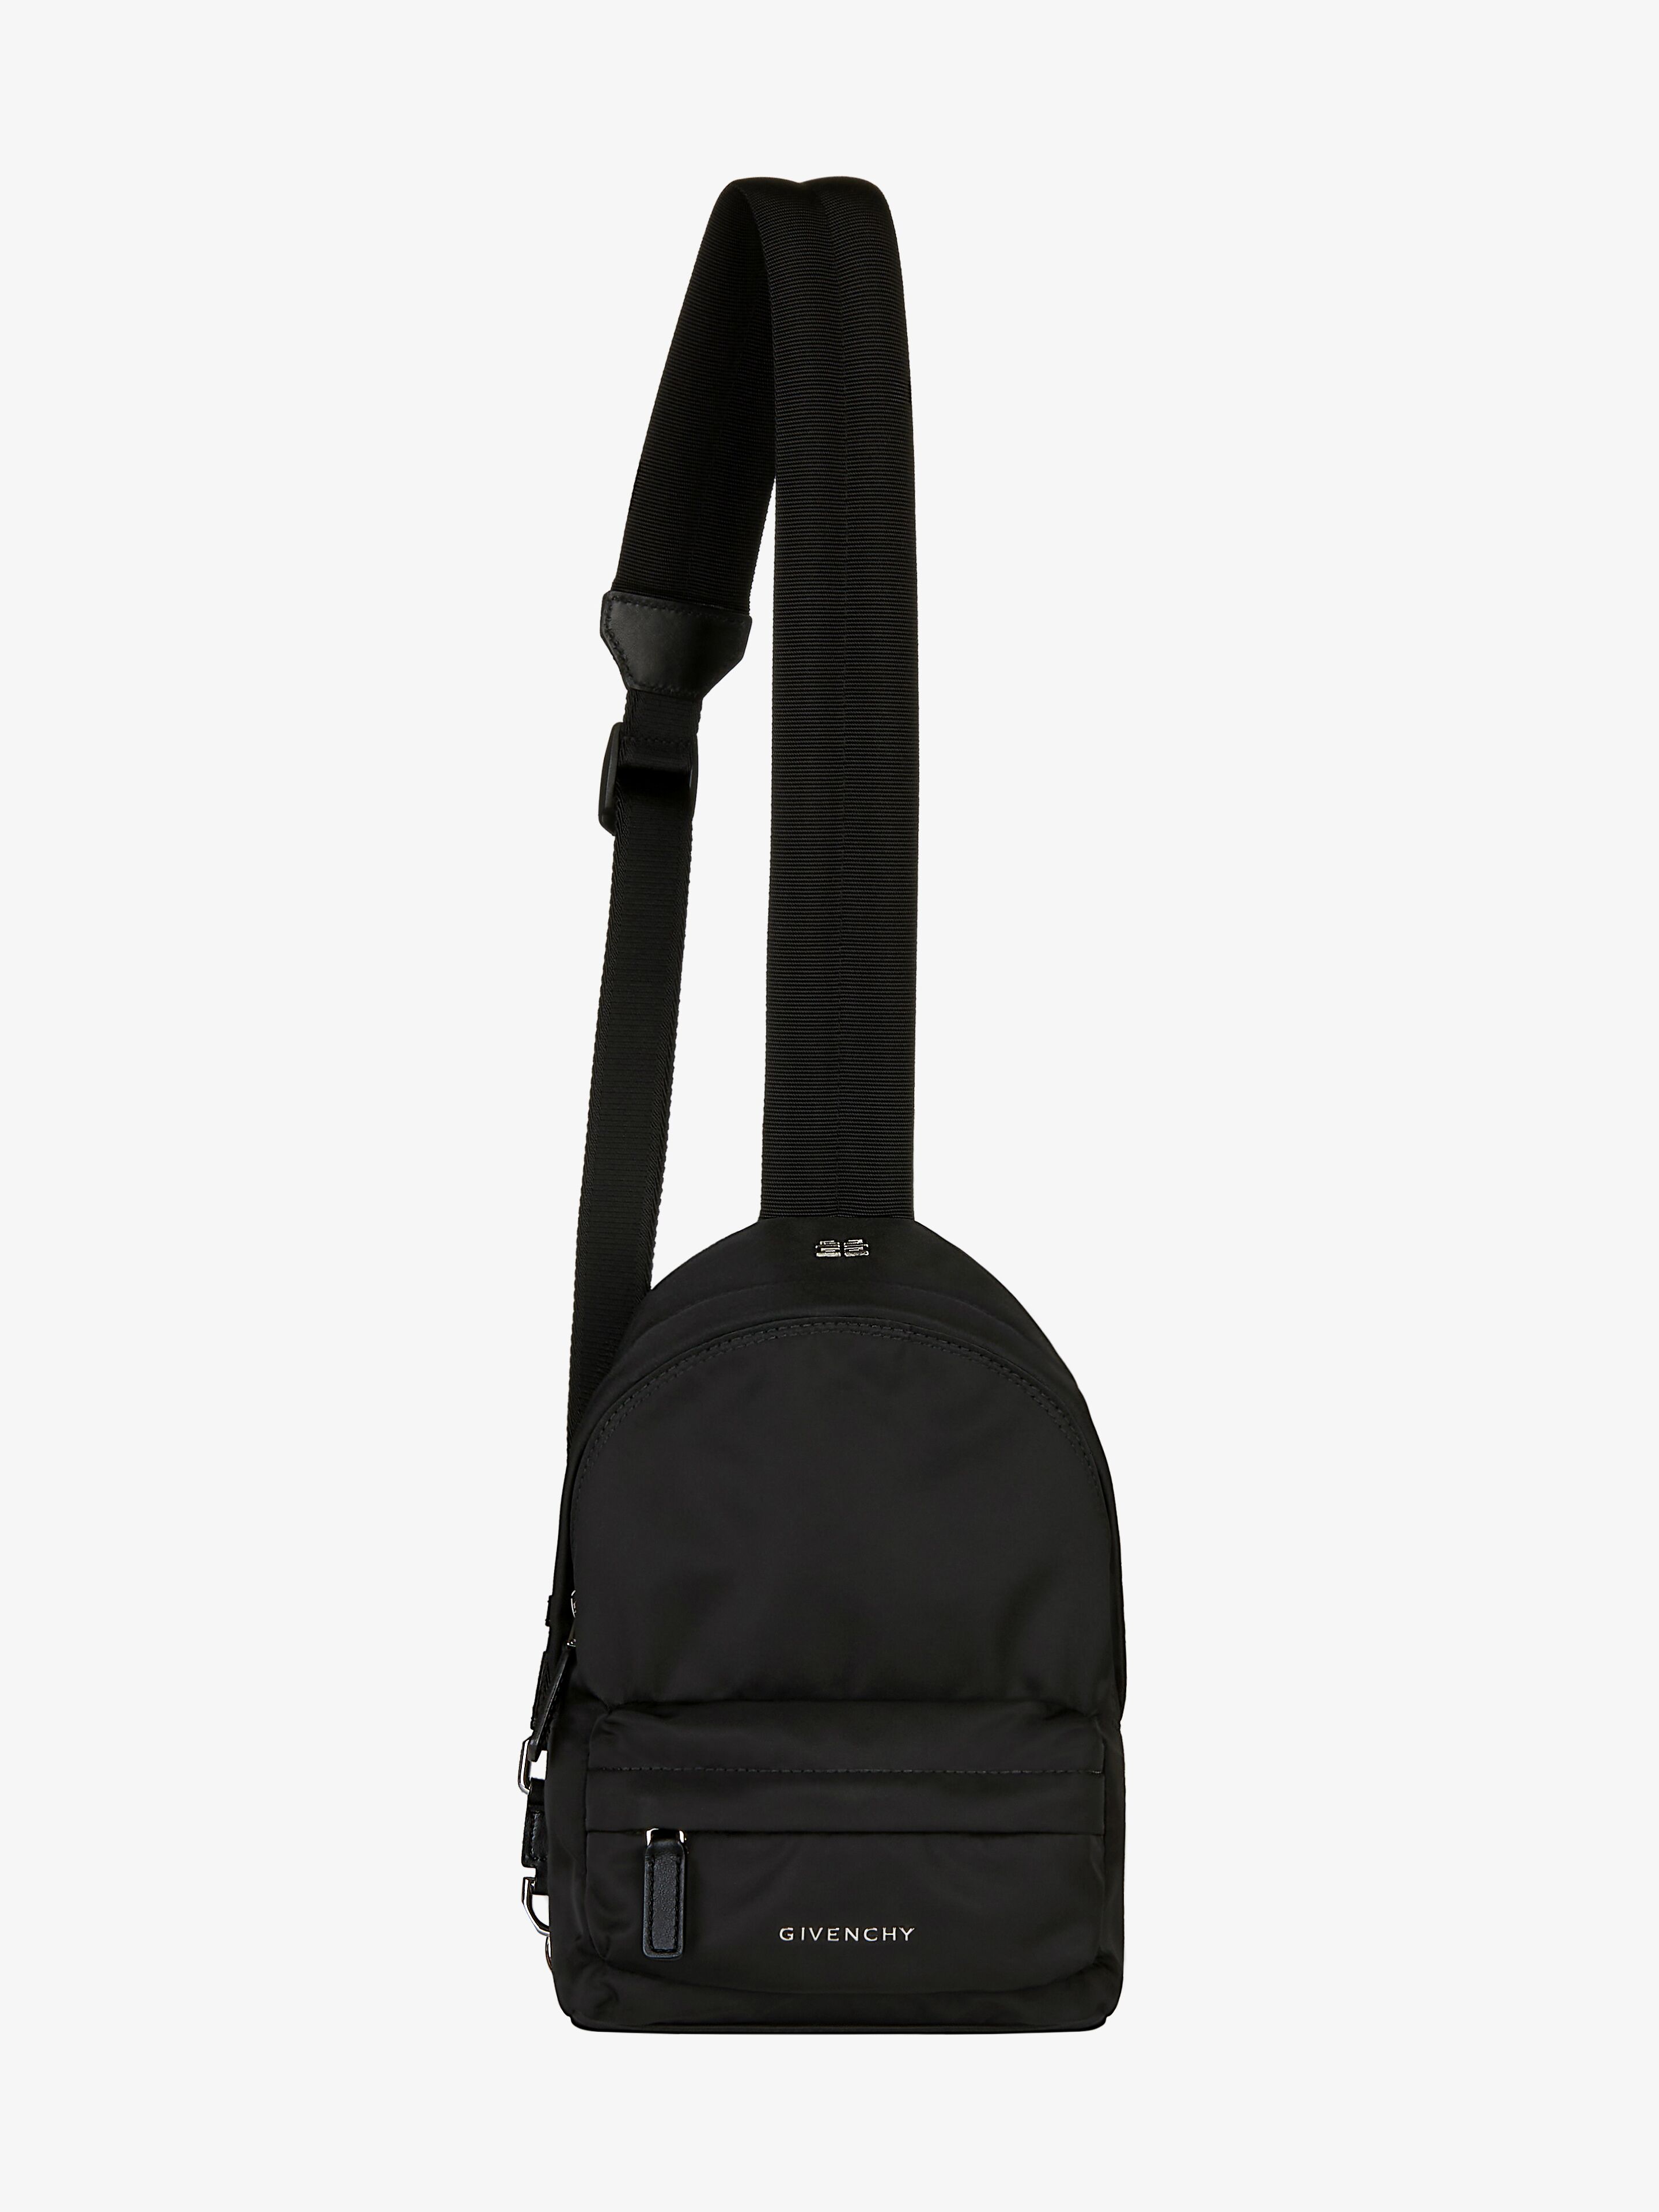 Cross-body Bags | Men bags | GIVENCHY Paris | Givenchy